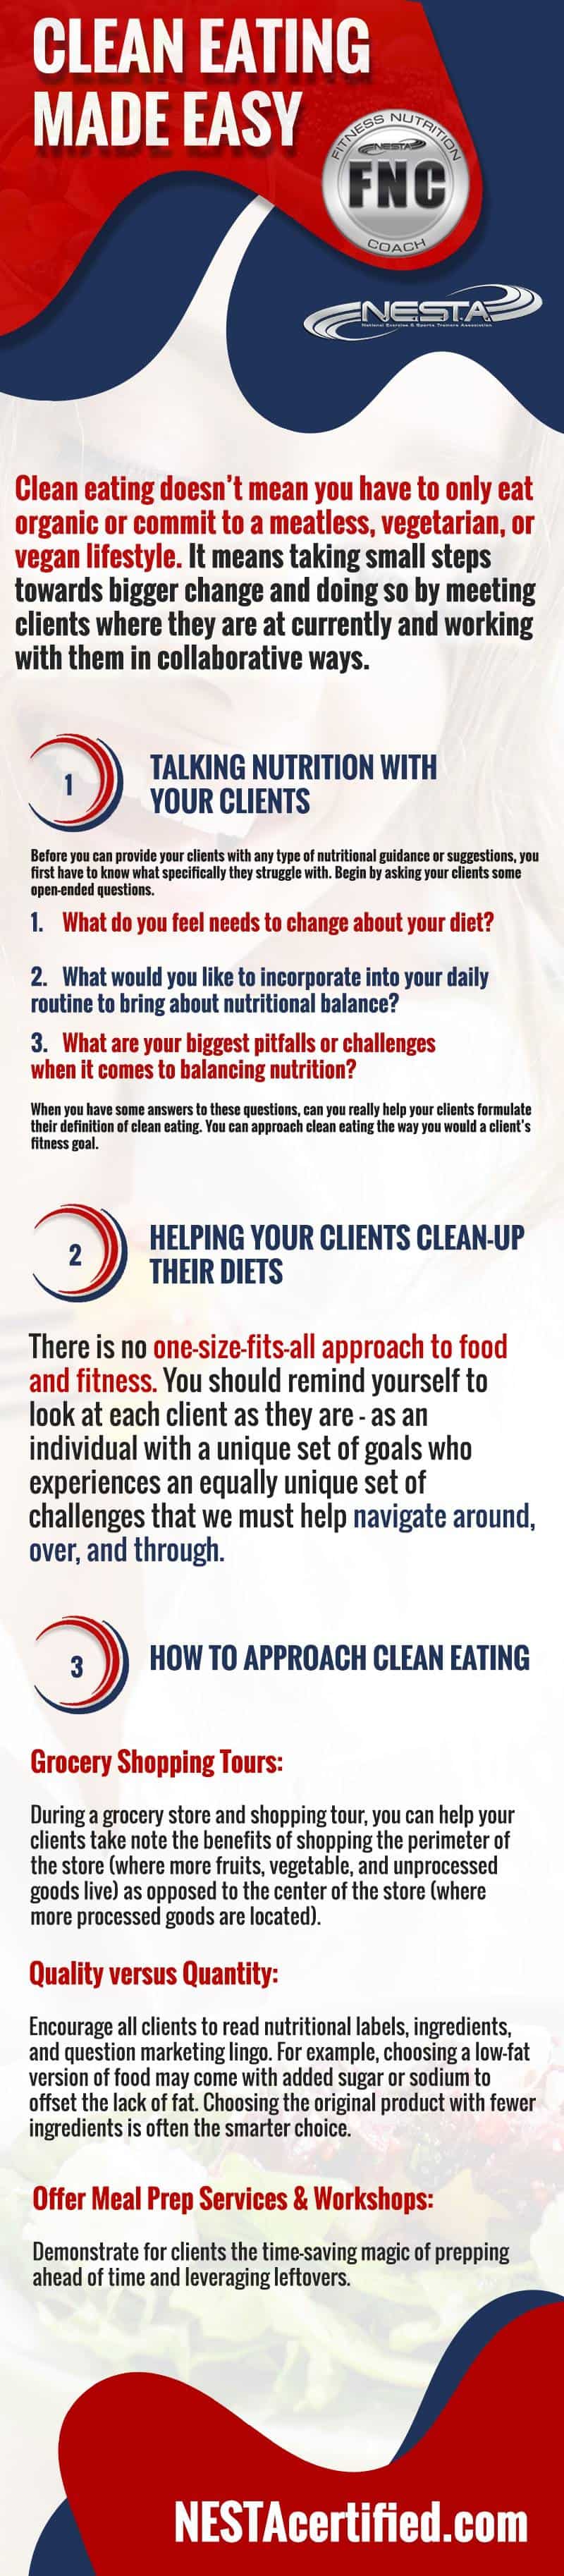 Setting Your Clients Up for Clean Eating Success